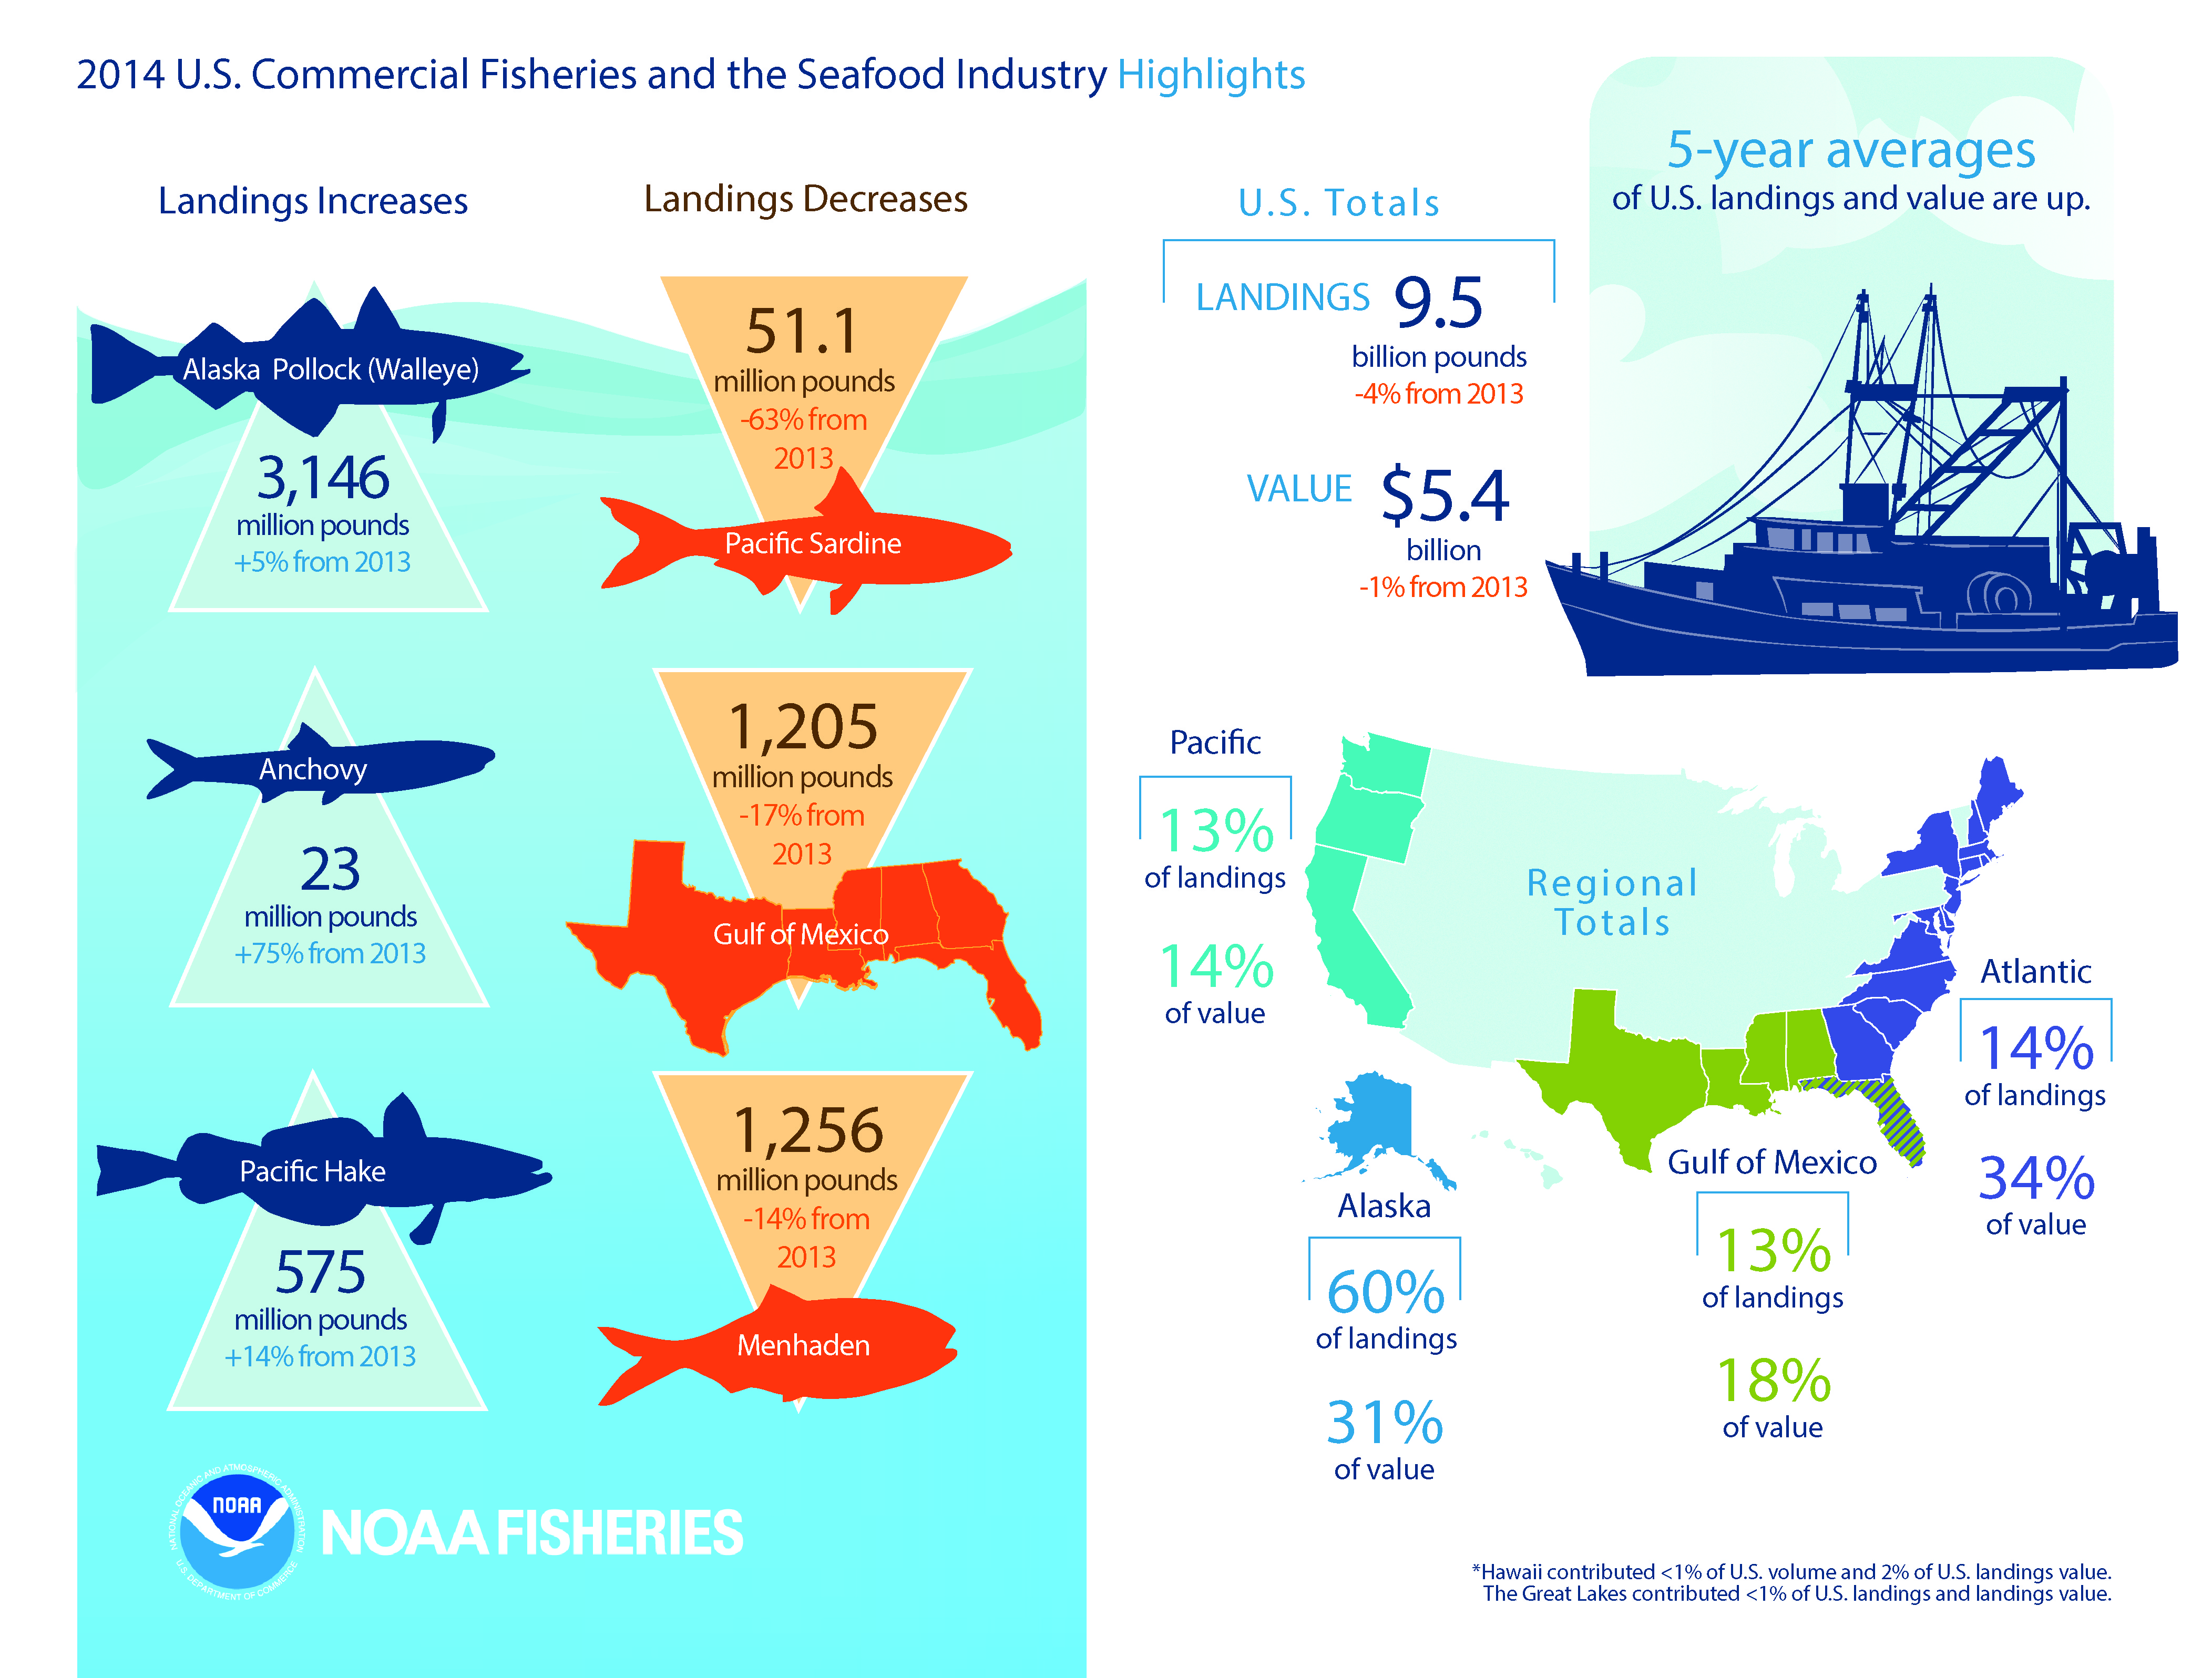 2014 U.S. Commercial Fisheries and Seafood Industry highlights. 